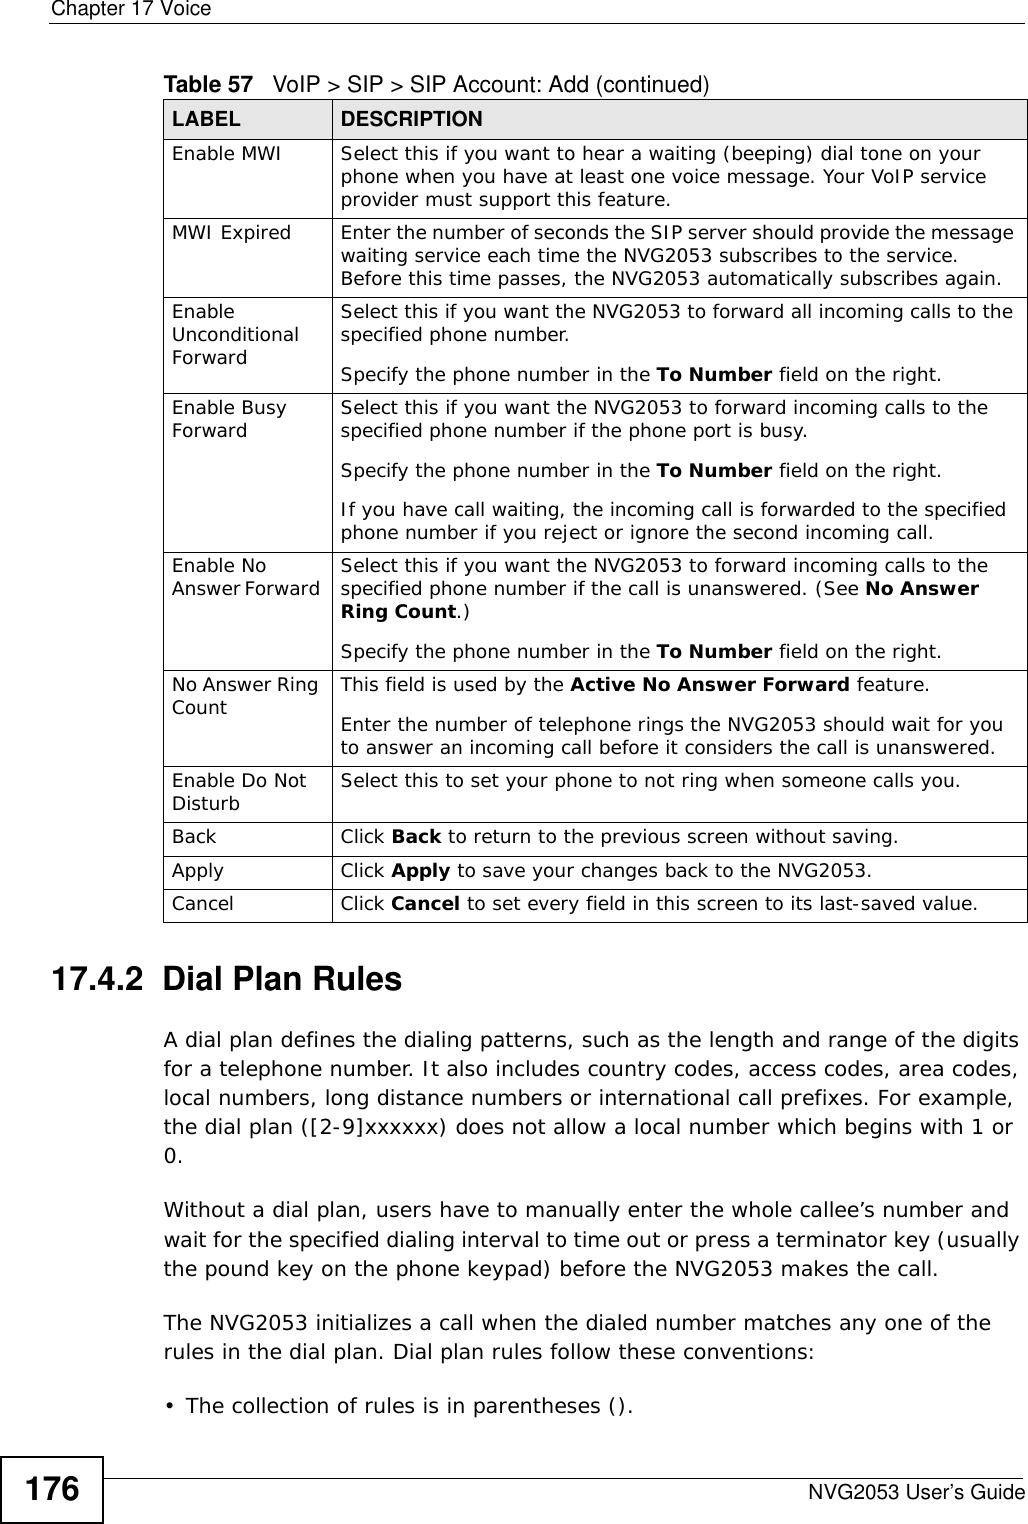 Chapter 17 VoiceNVG2053 User’s Guide17617.4.2  Dial Plan RulesA dial plan defines the dialing patterns, such as the length and range of the digits for a telephone number. It also includes country codes, access codes, area codes, local numbers, long distance numbers or international call prefixes. For example, the dial plan ([2-9]xxxxxx) does not allow a local number which begins with 1 or 0.Without a dial plan, users have to manually enter the whole callee’s number and wait for the specified dialing interval to time out or press a terminator key (usually the pound key on the phone keypad) before the NVG2053 makes the call.The NVG2053 initializes a call when the dialed number matches any one of the rules in the dial plan. Dial plan rules follow these conventions:• The collection of rules is in parentheses ().Enable MWI  Select this if you want to hear a waiting (beeping) dial tone on your phone when you have at least one voice message. Your VoIP service provider must support this feature.MWI Expired Enter the number of seconds the SIP server should provide the message waiting service each time the NVG2053 subscribes to the service. Before this time passes, the NVG2053 automatically subscribes again.Enable Unconditional ForwardSelect this if you want the NVG2053 to forward all incoming calls to the specified phone number. Specify the phone number in the To Number field on the right.Enable Busy Forward Select this if you want the NVG2053 to forward incoming calls to the specified phone number if the phone port is busy. Specify the phone number in the To Number field on the right.If you have call waiting, the incoming call is forwarded to the specified phone number if you reject or ignore the second incoming call.Enable No Answer Forward  Select this if you want the NVG2053 to forward incoming calls to the specified phone number if the call is unanswered. (See No Answer Ring Count.) Specify the phone number in the To Number field on the right.No Answer Ring Count  This field is used by the Active No Answer Forward feature.Enter the number of telephone rings the NVG2053 should wait for you to answer an incoming call before it considers the call is unanswered.Enable Do Not Disturb Select this to set your phone to not ring when someone calls you.Back Click Back to return to the previous screen without saving.Apply Click Apply to save your changes back to the NVG2053.Cancel Click Cancel to set every field in this screen to its last-saved value.Table 57   VoIP &gt; SIP &gt; SIP Account: Add (continued)LABEL DESCRIPTION